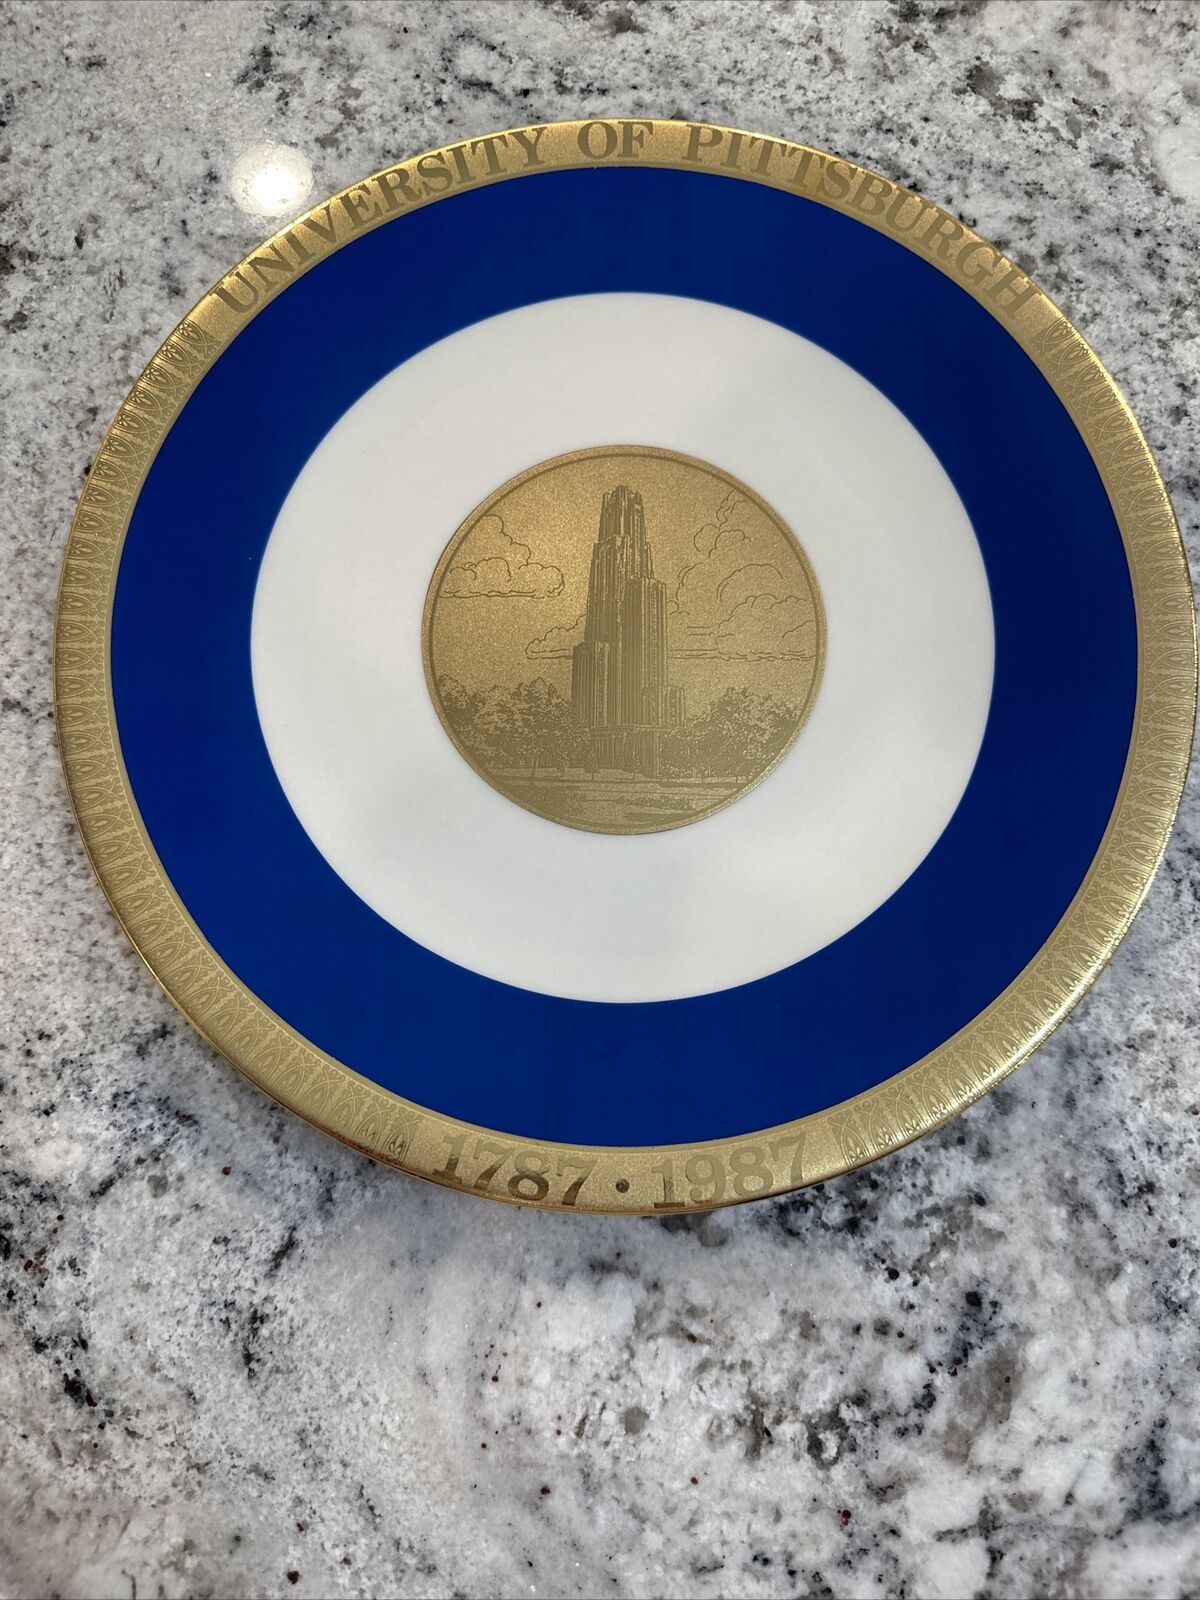 University  Of Pittsburgh bicentennial 200th Anniversary Plate Limited  Edition 